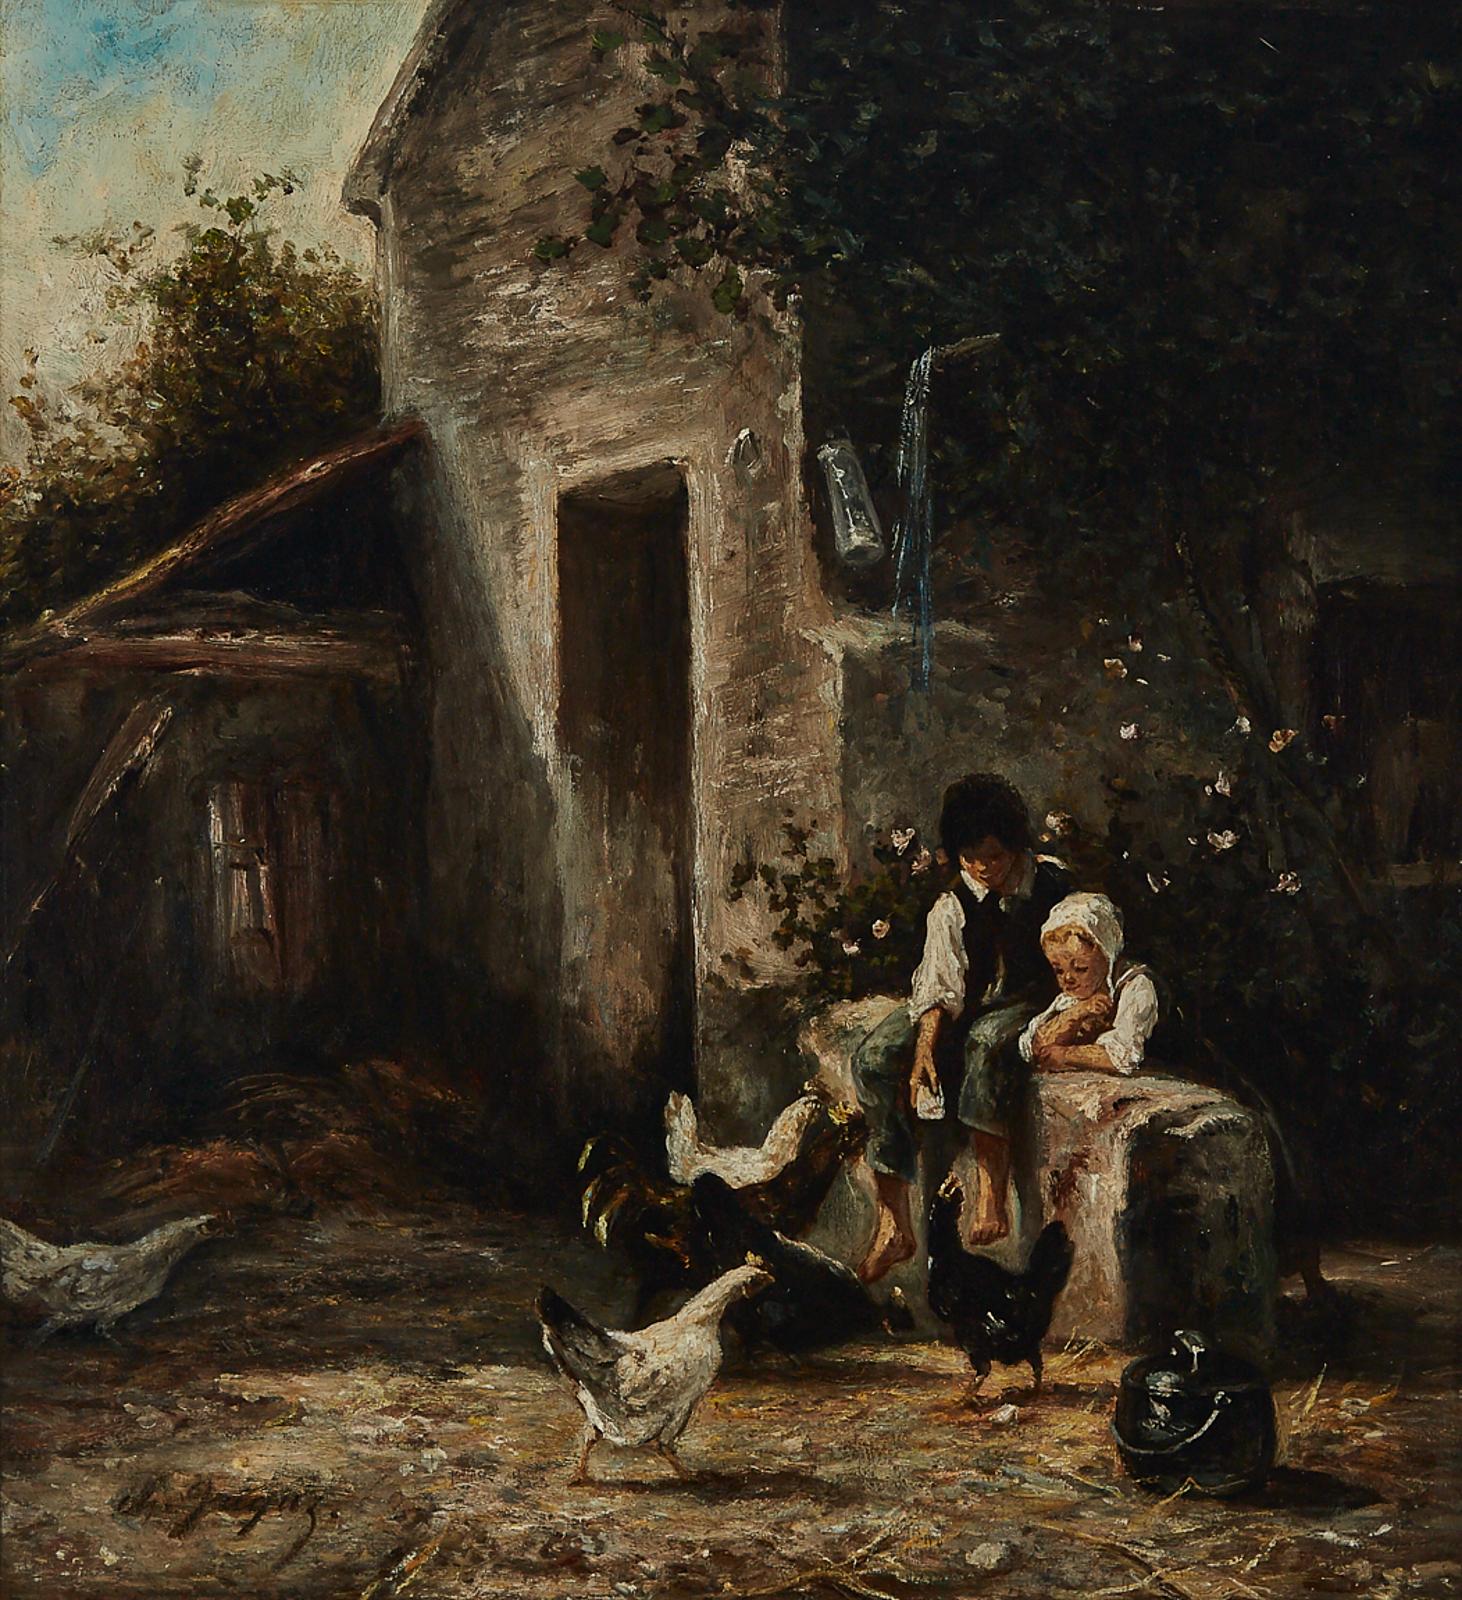 Charles Émile Jacque (1813-1894) - Children Playing With Farmyard Chickens